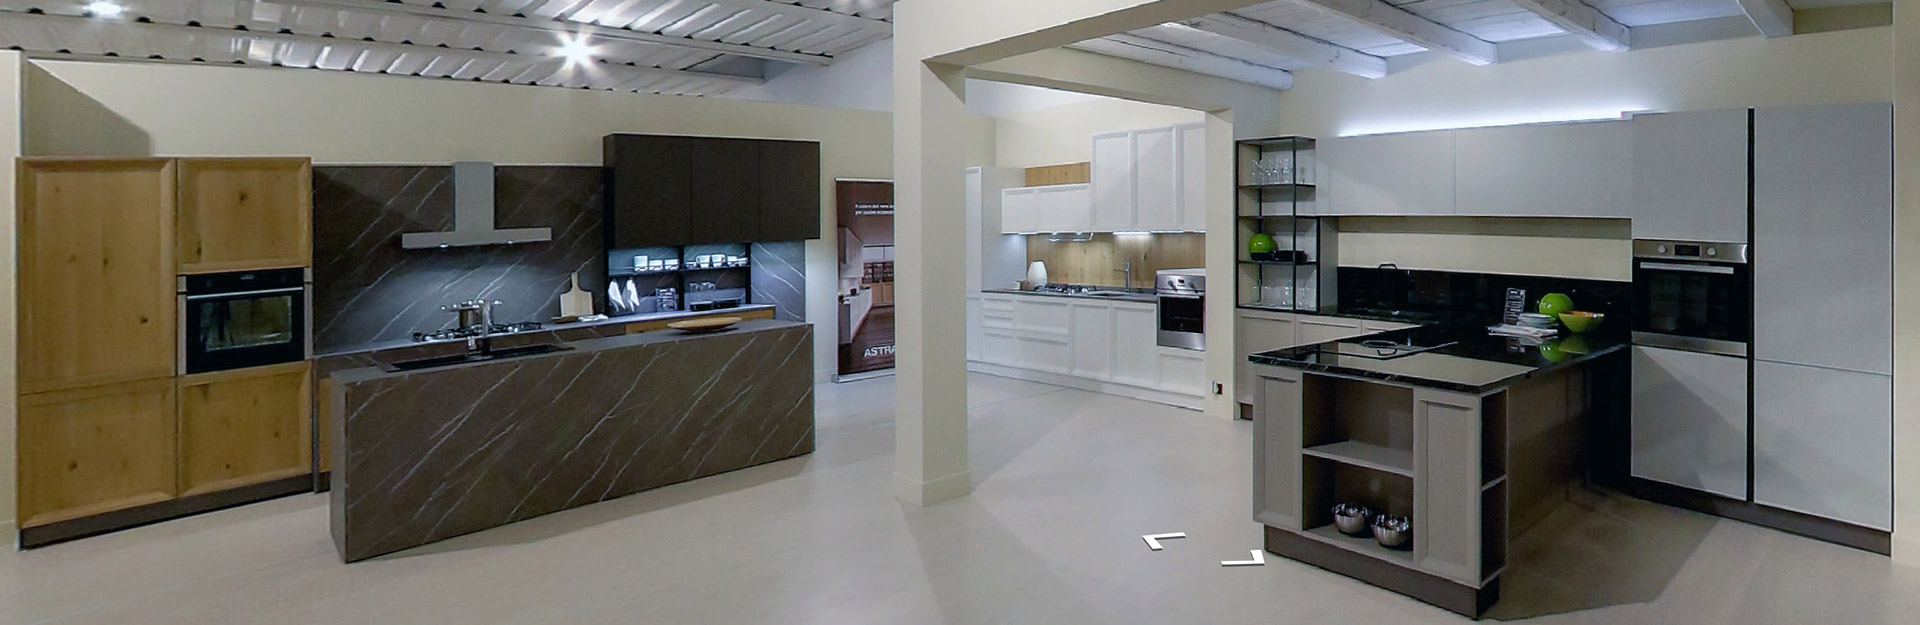 BROWSE THE SHOWROOM ASTRA KITCHENS WITH GOOGLE STREET VIEW